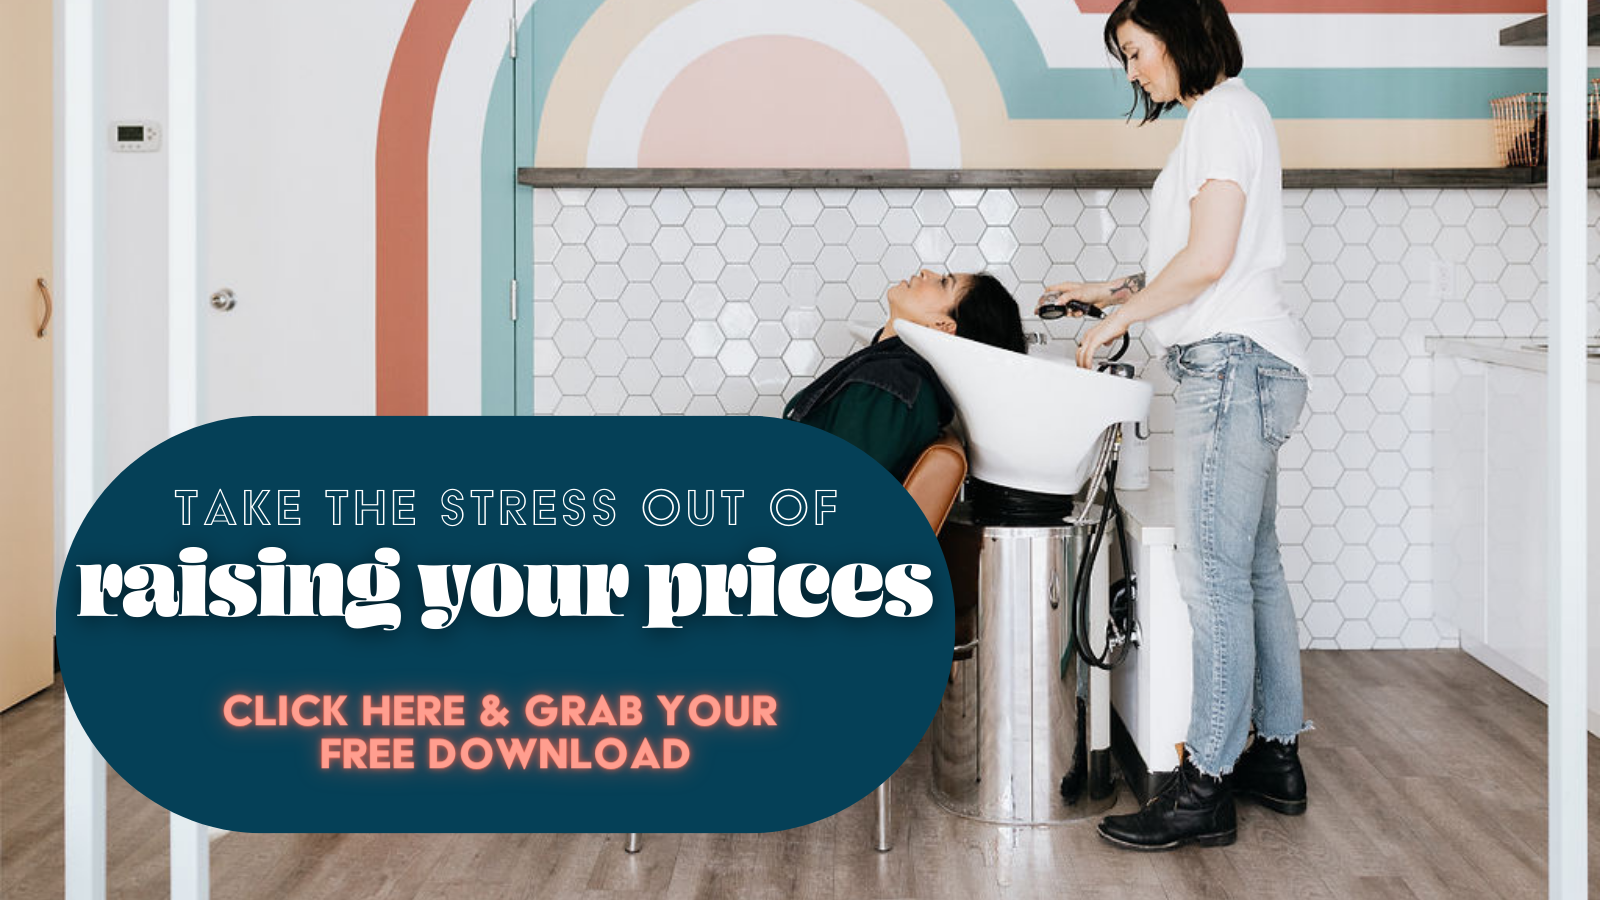 Dawn stands at a salon sink wearing blue jeans and a ripped t-shirt as she washes her clients hair who is leaning back in the sink. Text overlay reads "Take the stress out of raising your prices click here and grab your free download"